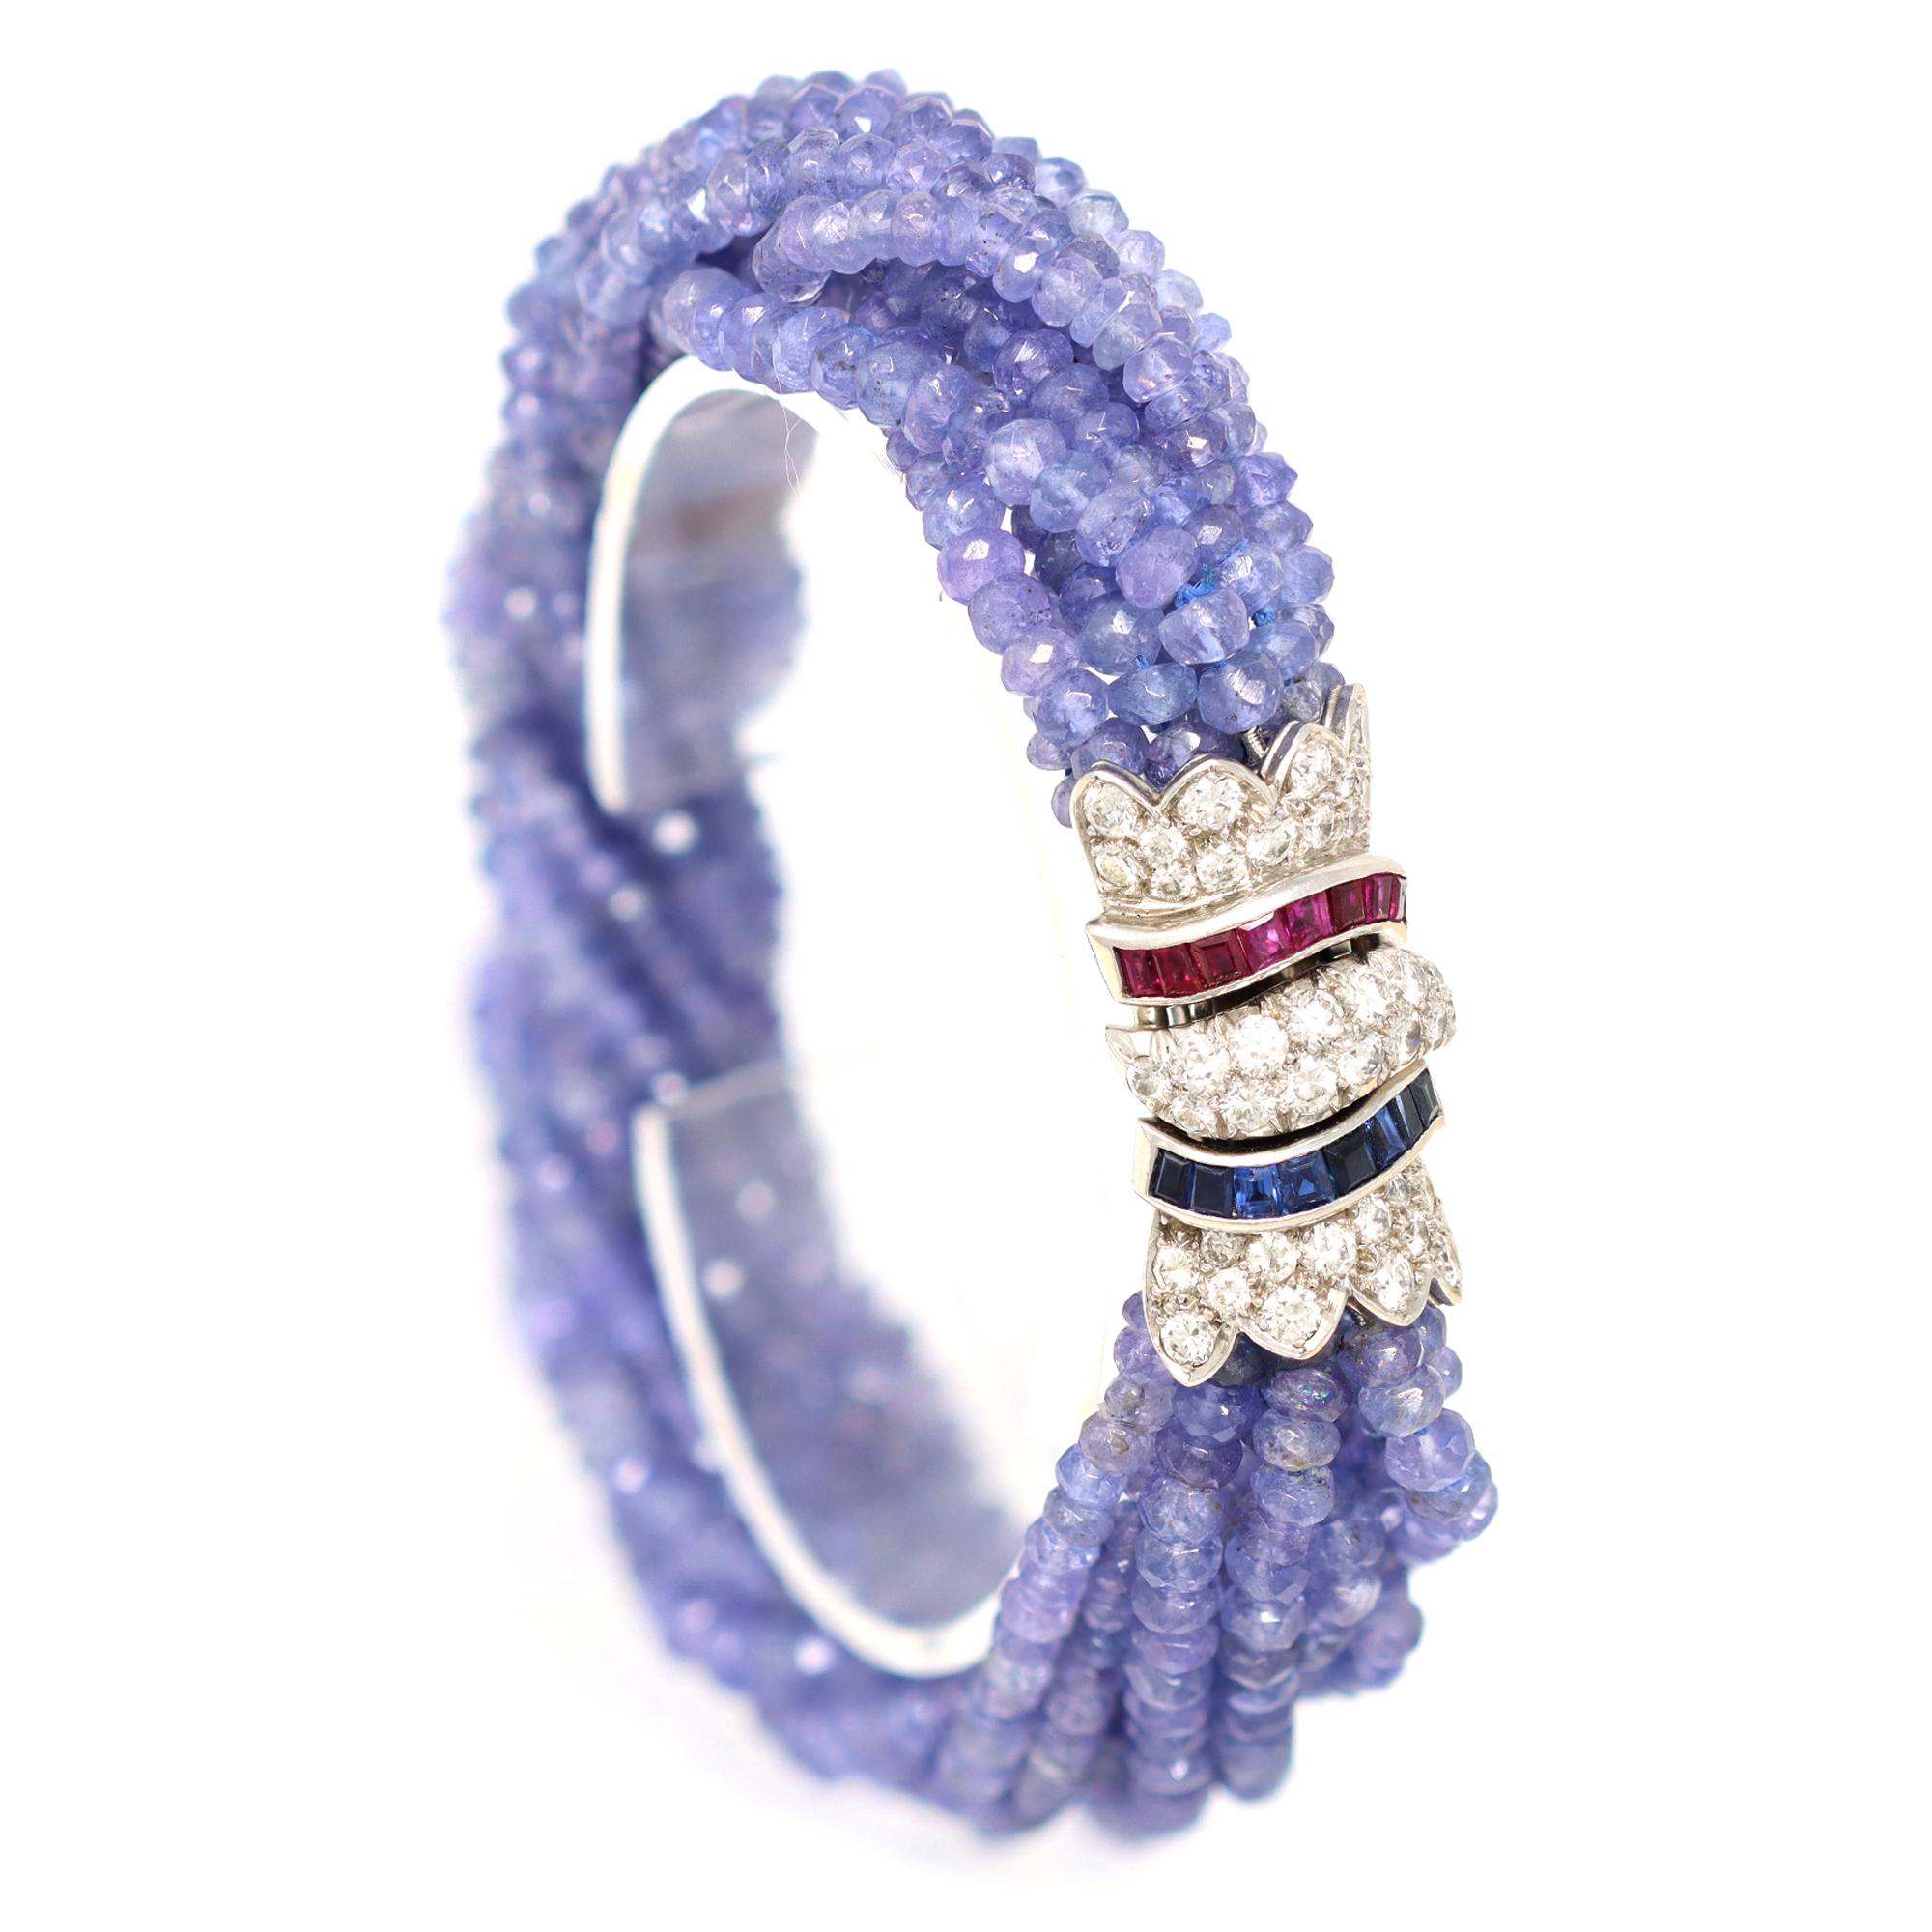 A faceted Ceylon blue sapphire bead multi-strand bracelet with diamonds sapphire and ruby clasp, set in 18K white gold, circa 1970. Made in the USA, this beaded bracelet is adorned with an exquisite clasp, presenting 0.80 carats of Ceylon blue